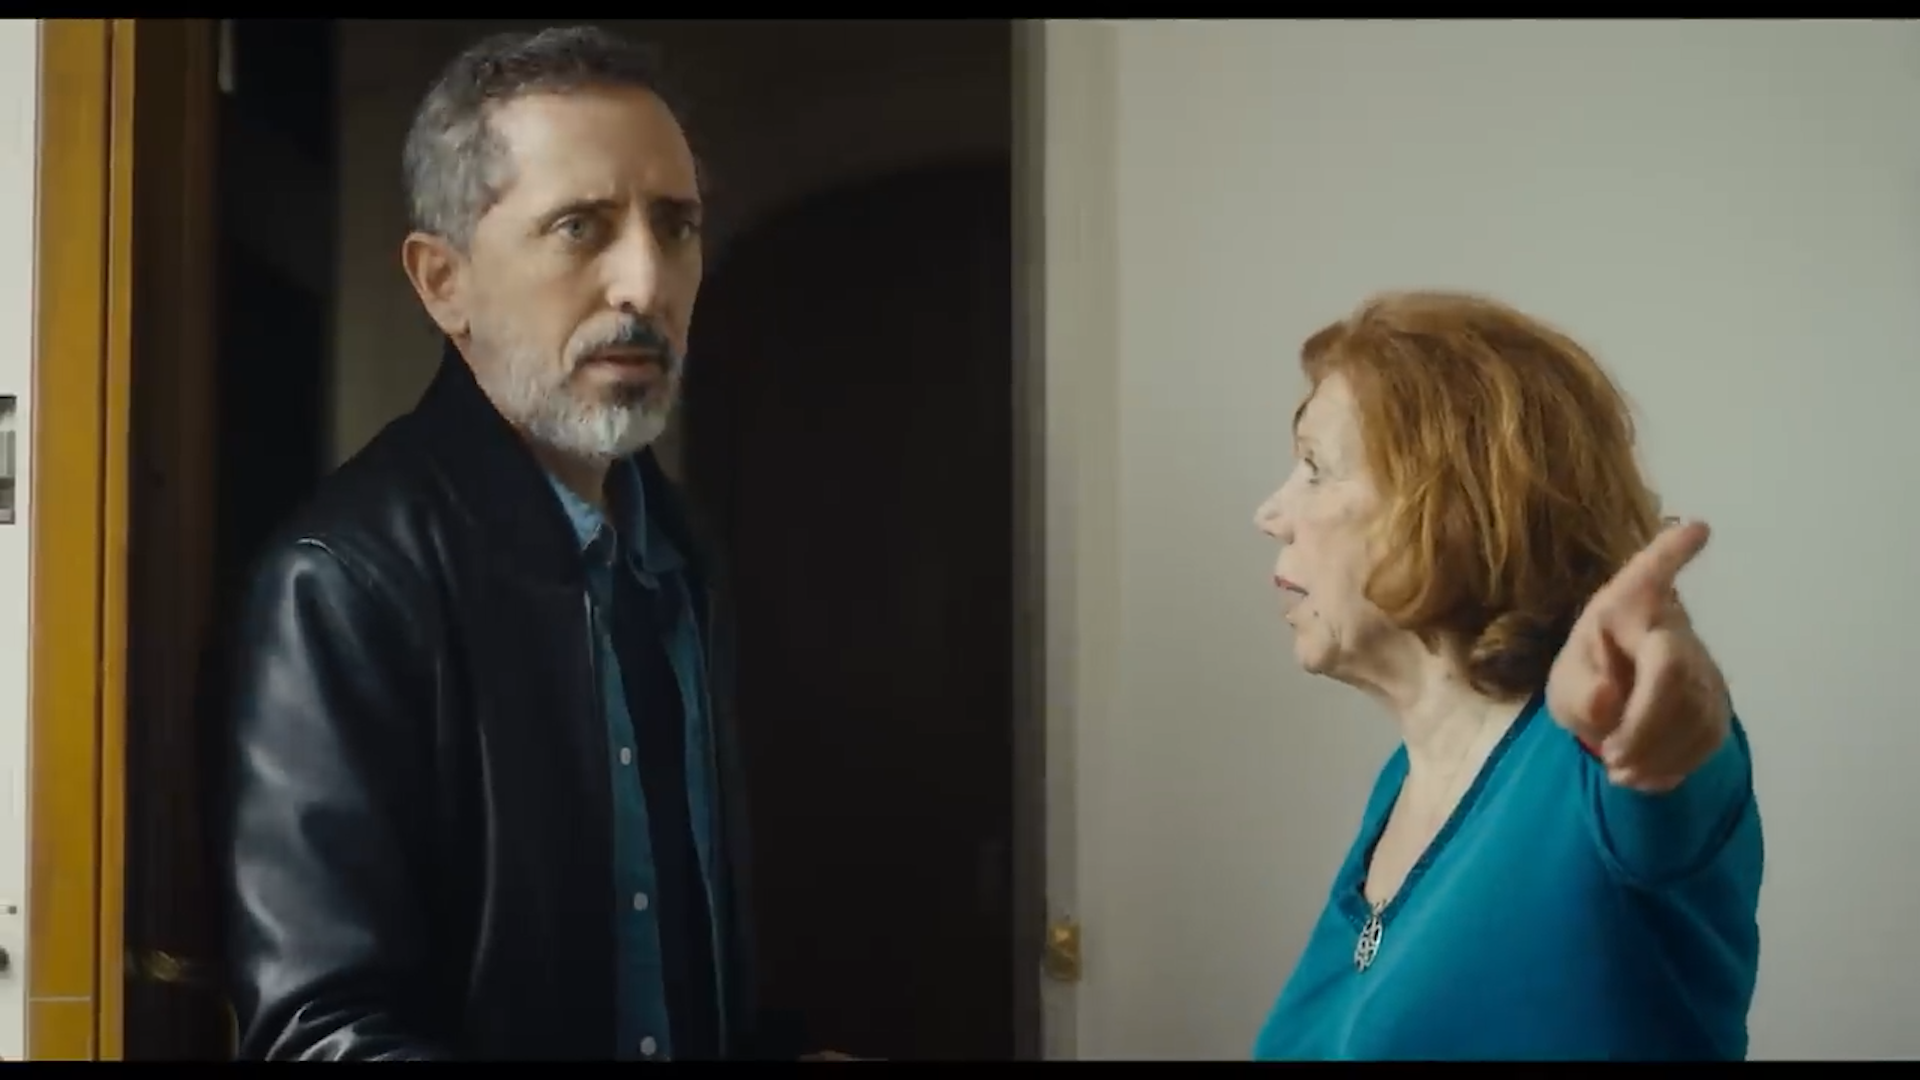 Gad Elmaleh and his mother, protagonists of the actor's latest film